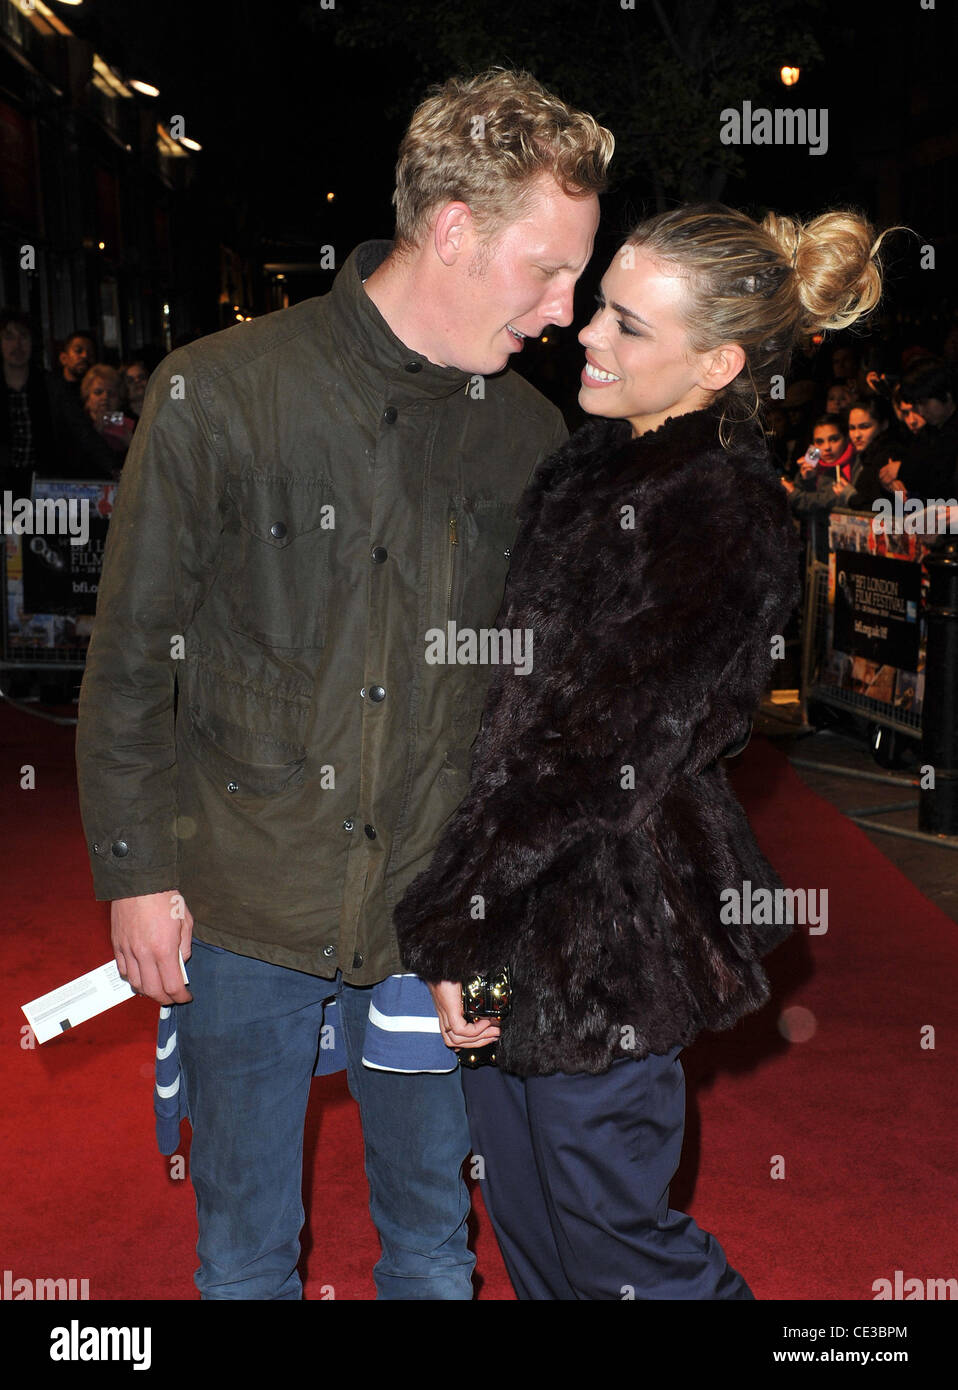 File Photos  Secret Diary Of A Call Girl star Billie Piper is pregnant with her second child, according to a U.K. report.  Laurence Fox and Billie Piper 54th BFI London Film Festival: 'Black Swan' UK premiere held at the Vue West End - Arrivals London, En Stock Photo